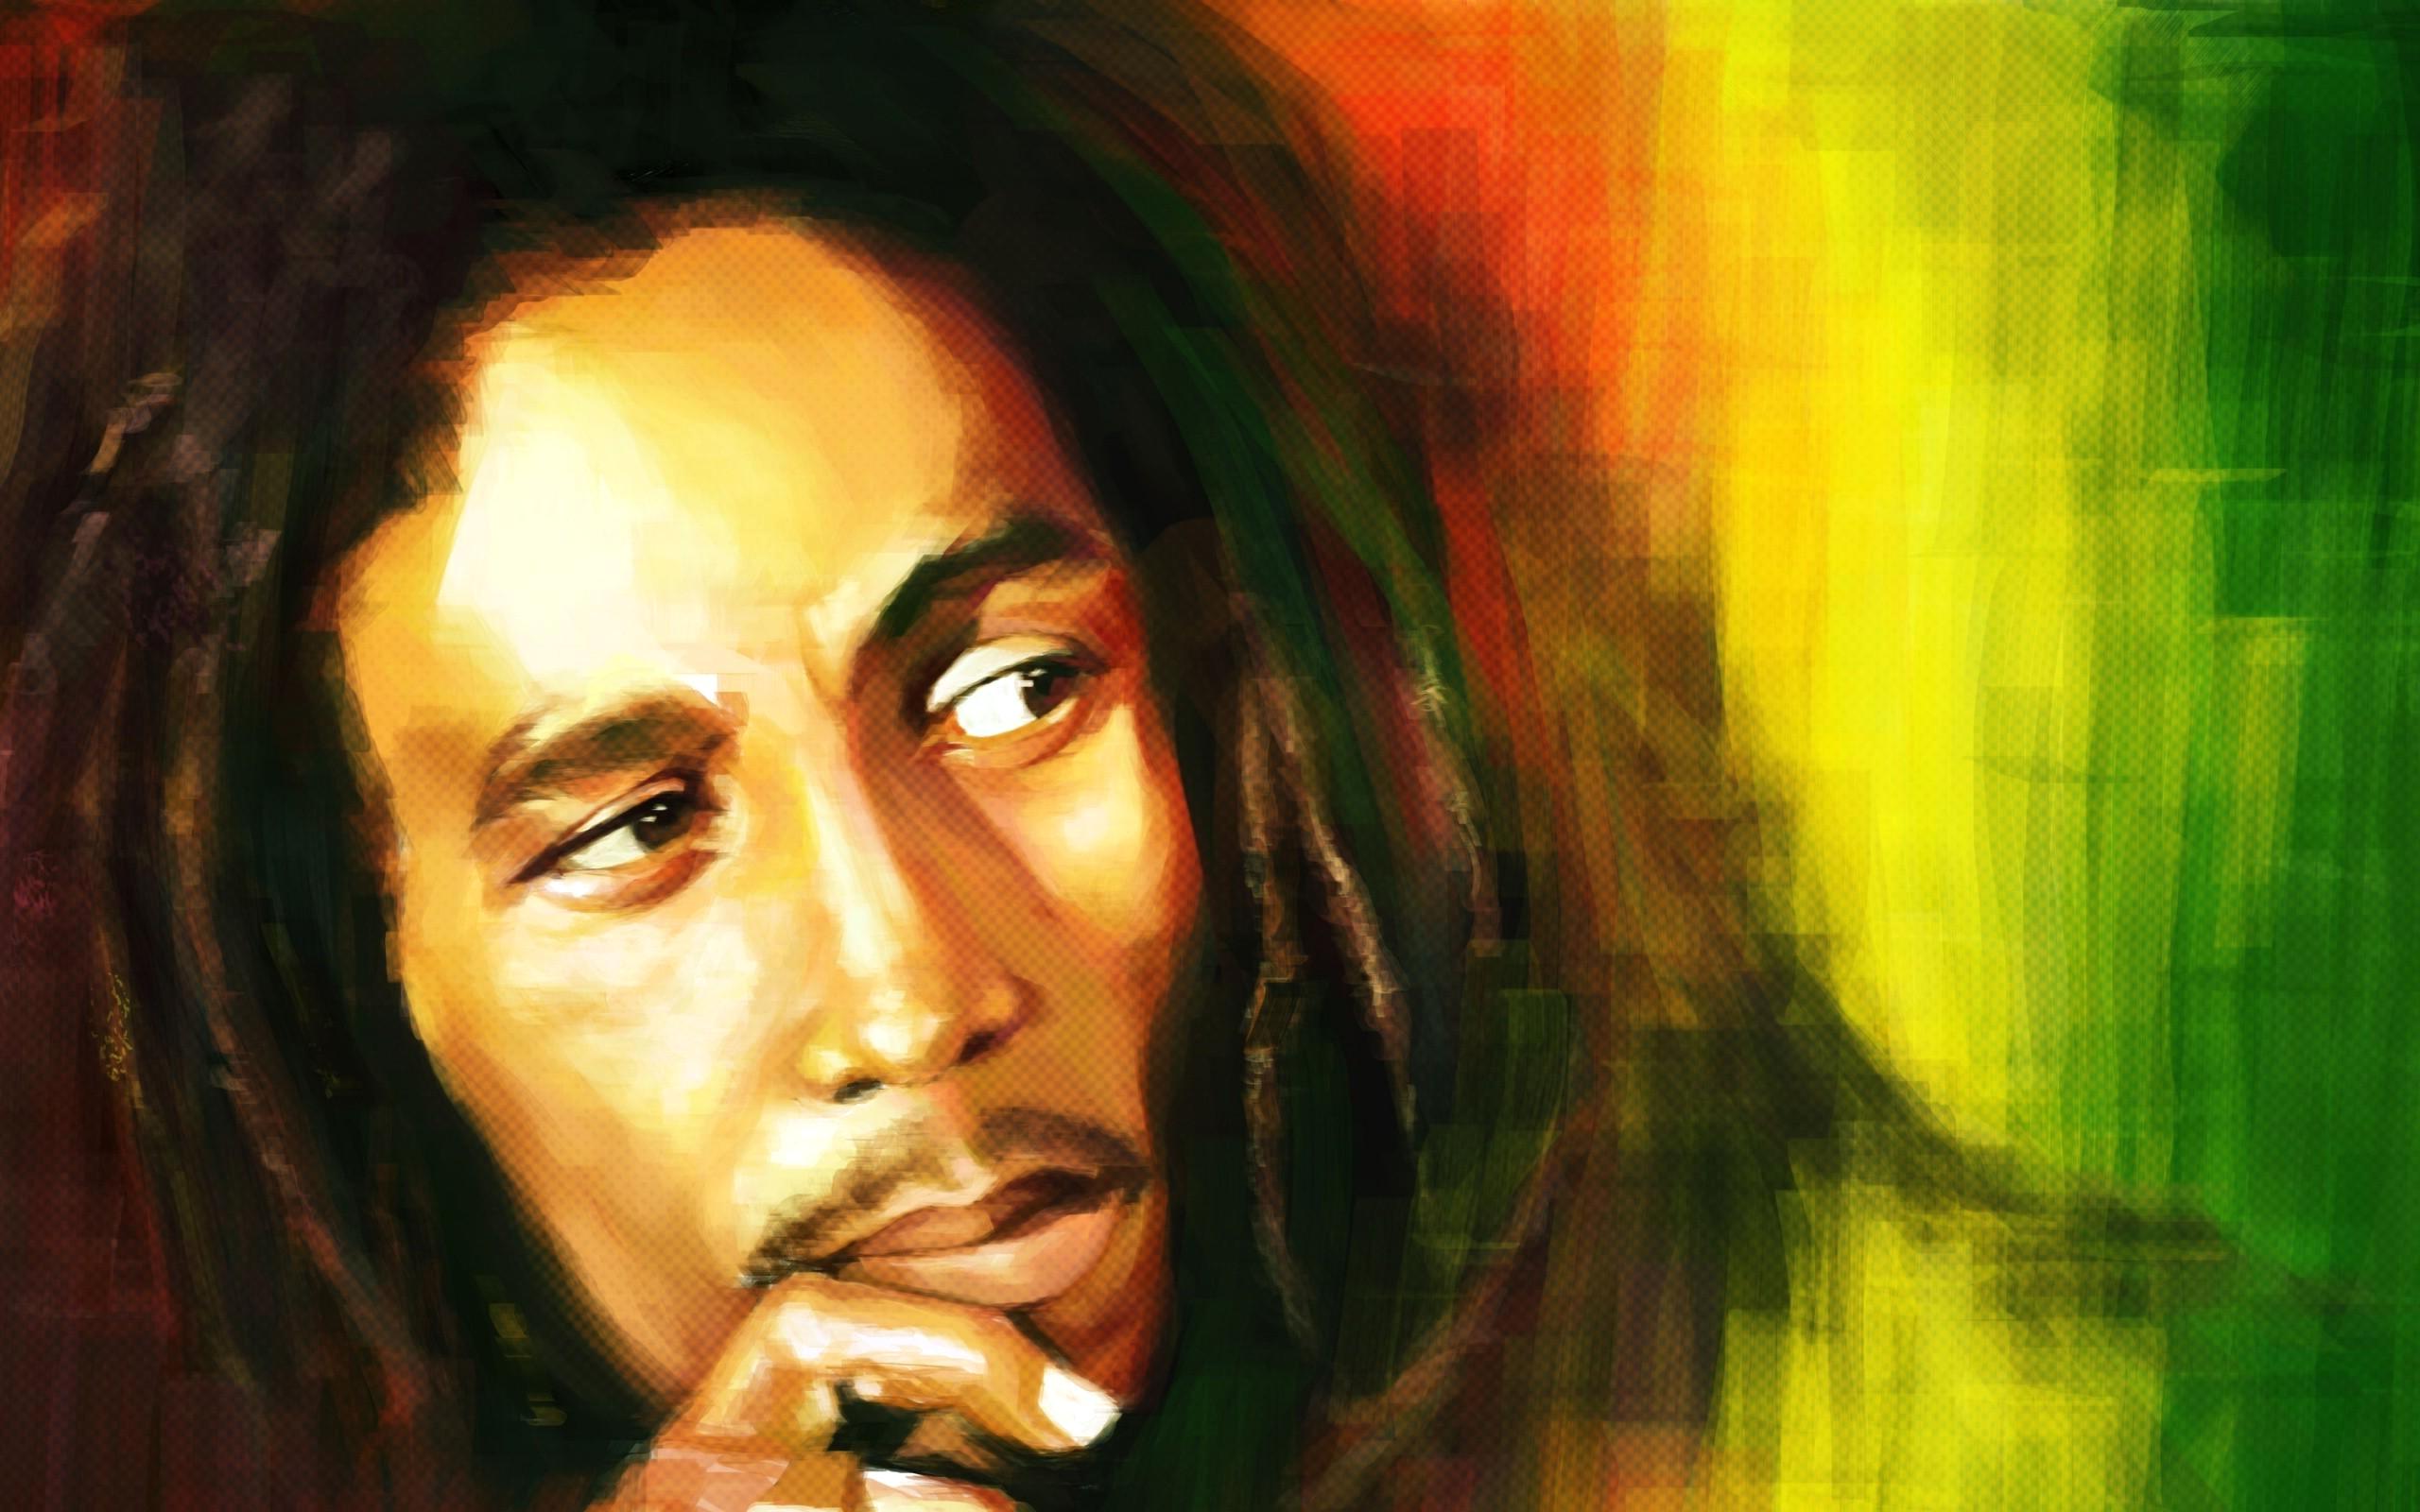 Bob Marley Wallpapers, Pictures, Images2560 x 1600